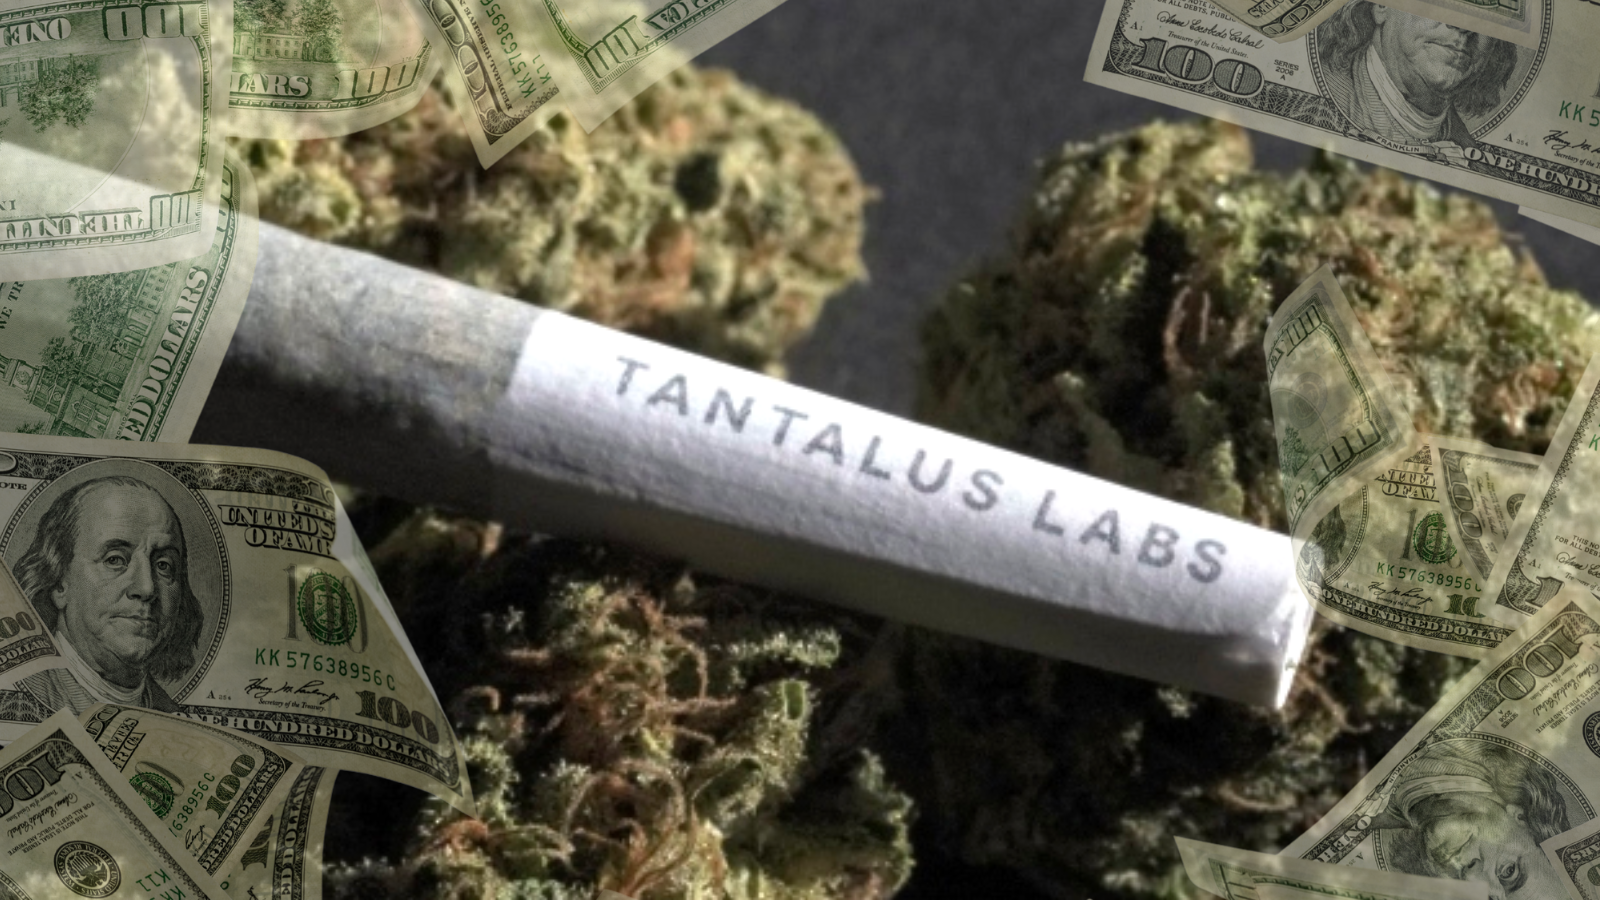 Tantalus Labs Merges with Atlantic Cultivation for Growth